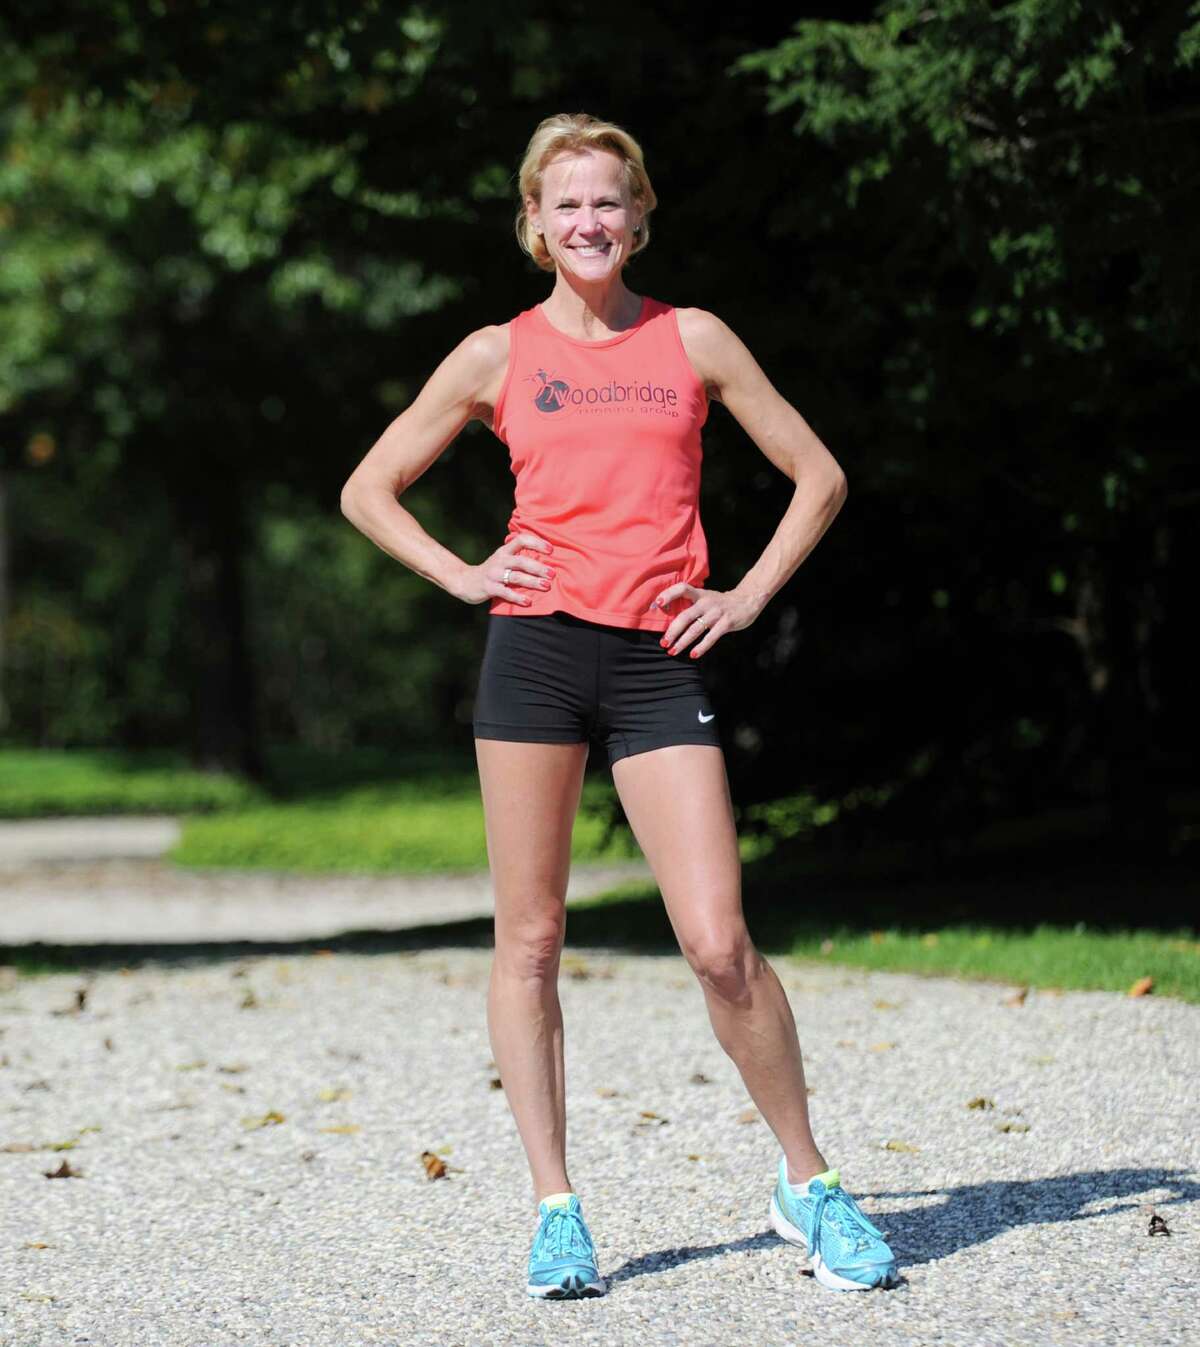 Long-distance runner Debbie Heelan of Bethel, at John McCarthy's Greenwich home, Friday afternoon, Oct. 5, 2012. Heelan will be running in the ING New York City Marathon Nov. 4 to raise money for the Hole in the Wall Gang Camp, a camp for kids with cancer and serious blood diseases that Jeremiah McCarthy, her friend's son, attended during his cancer illness.